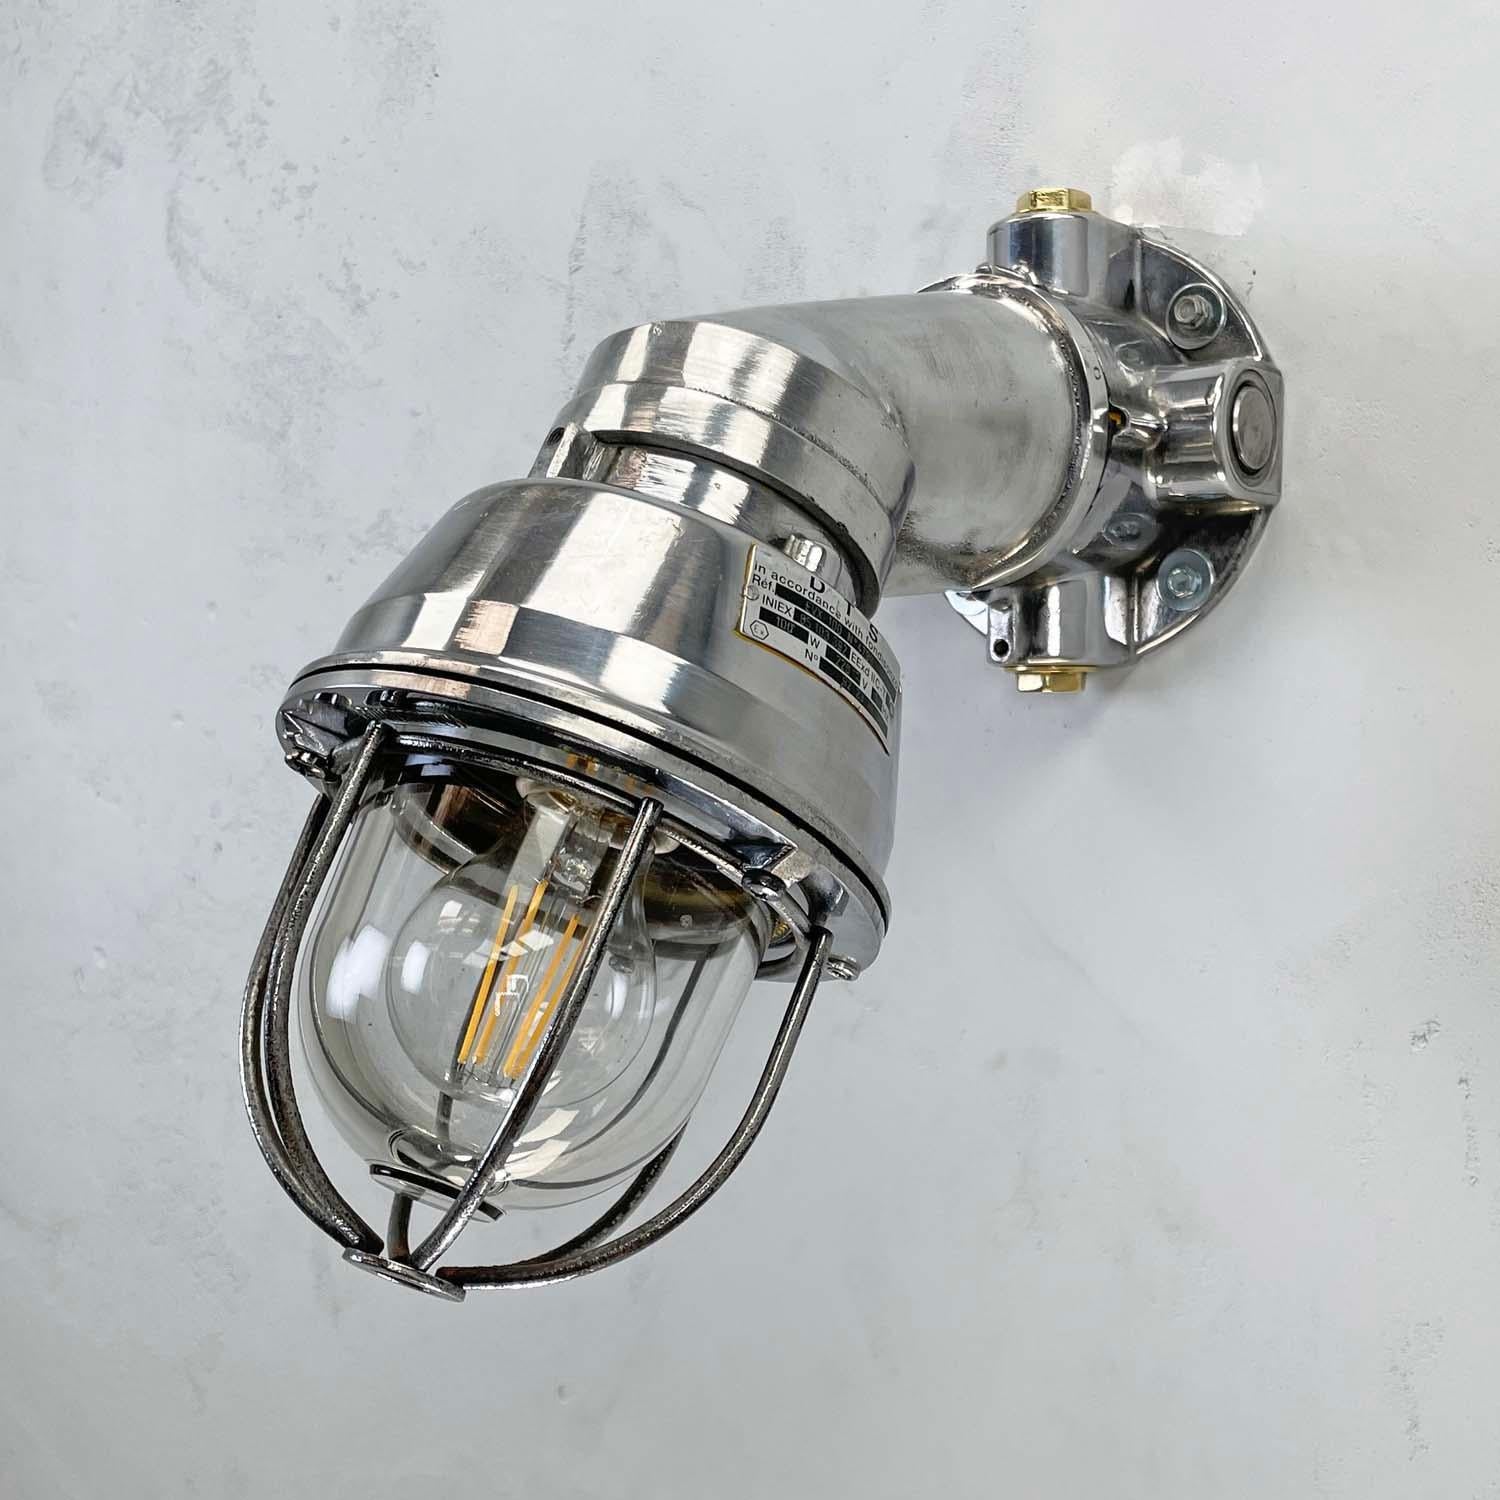 Italian made vintage industrial cast aluminium cantilever wall lighting with tempered glass dome and cage. Add a touch of the industrial to your interior with these large metal wall light fixtures. Reclaimed from Cargo ships and super tankers built